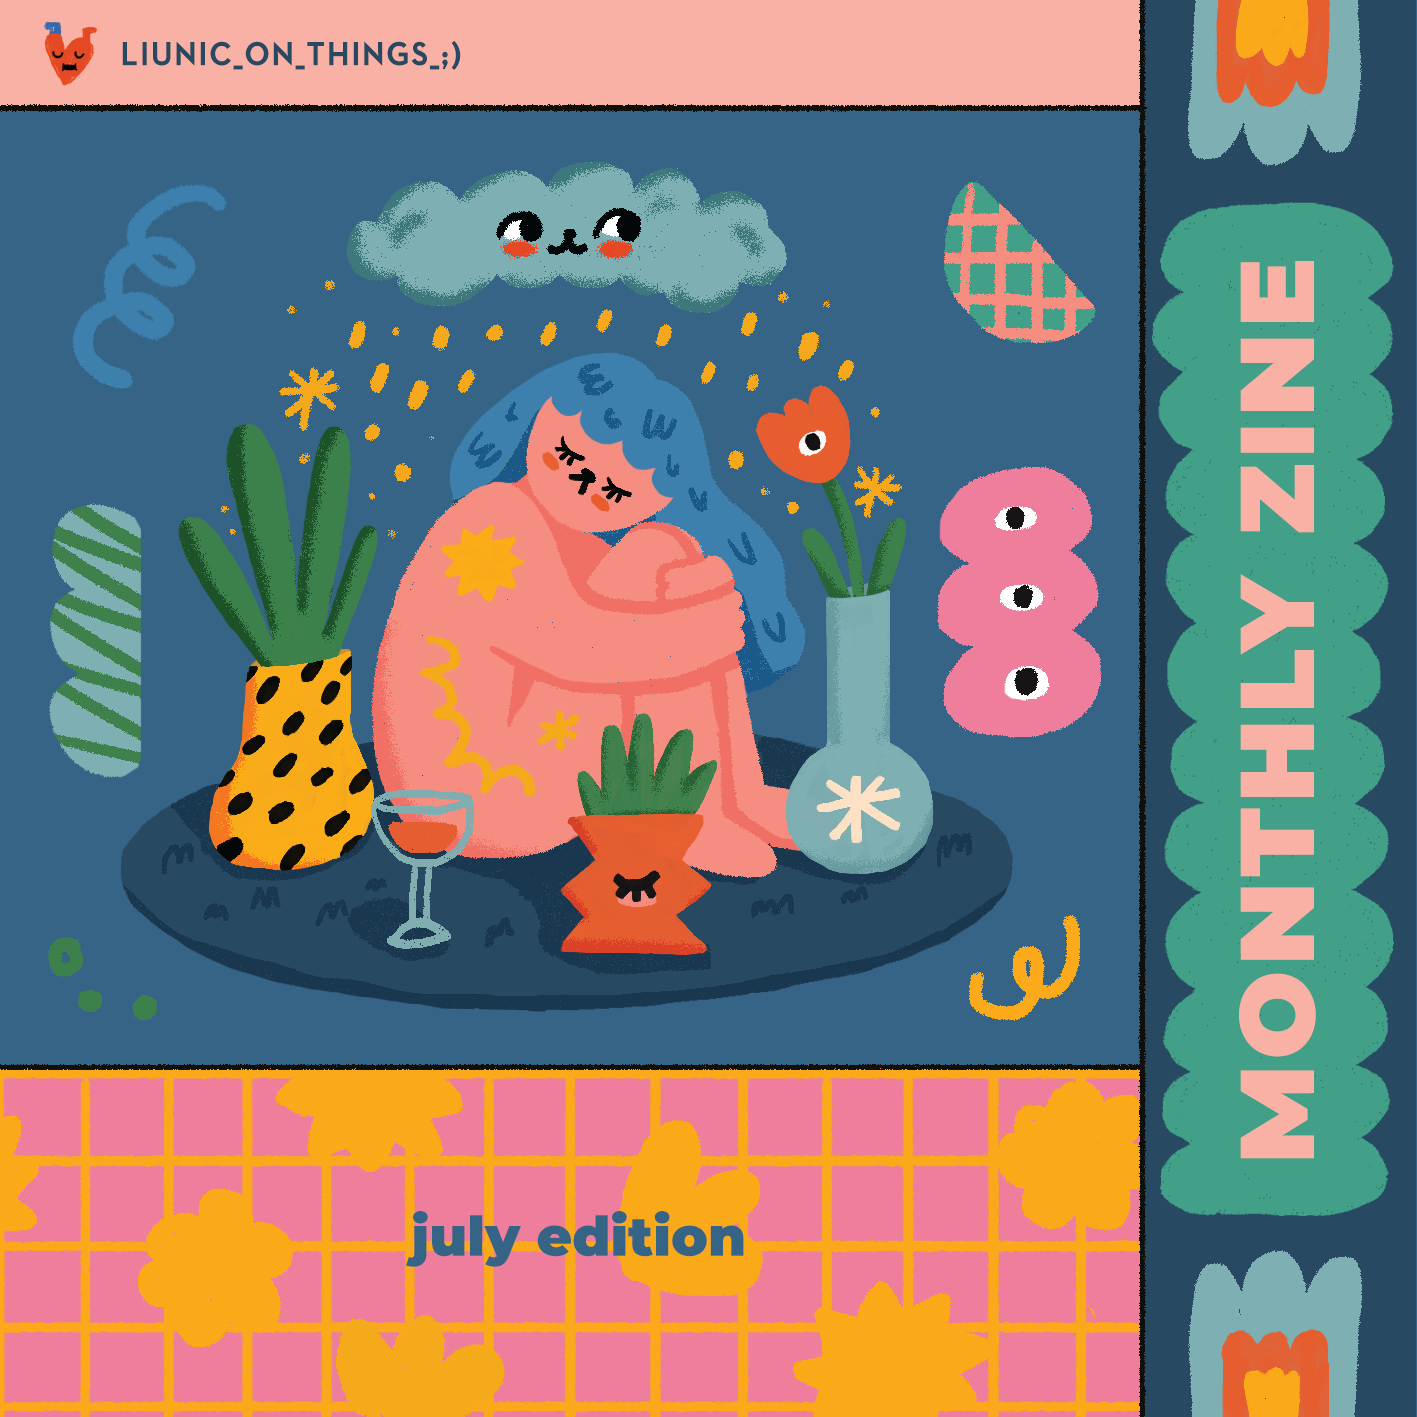 Liunic on Things Monthly Zine: July Edition!